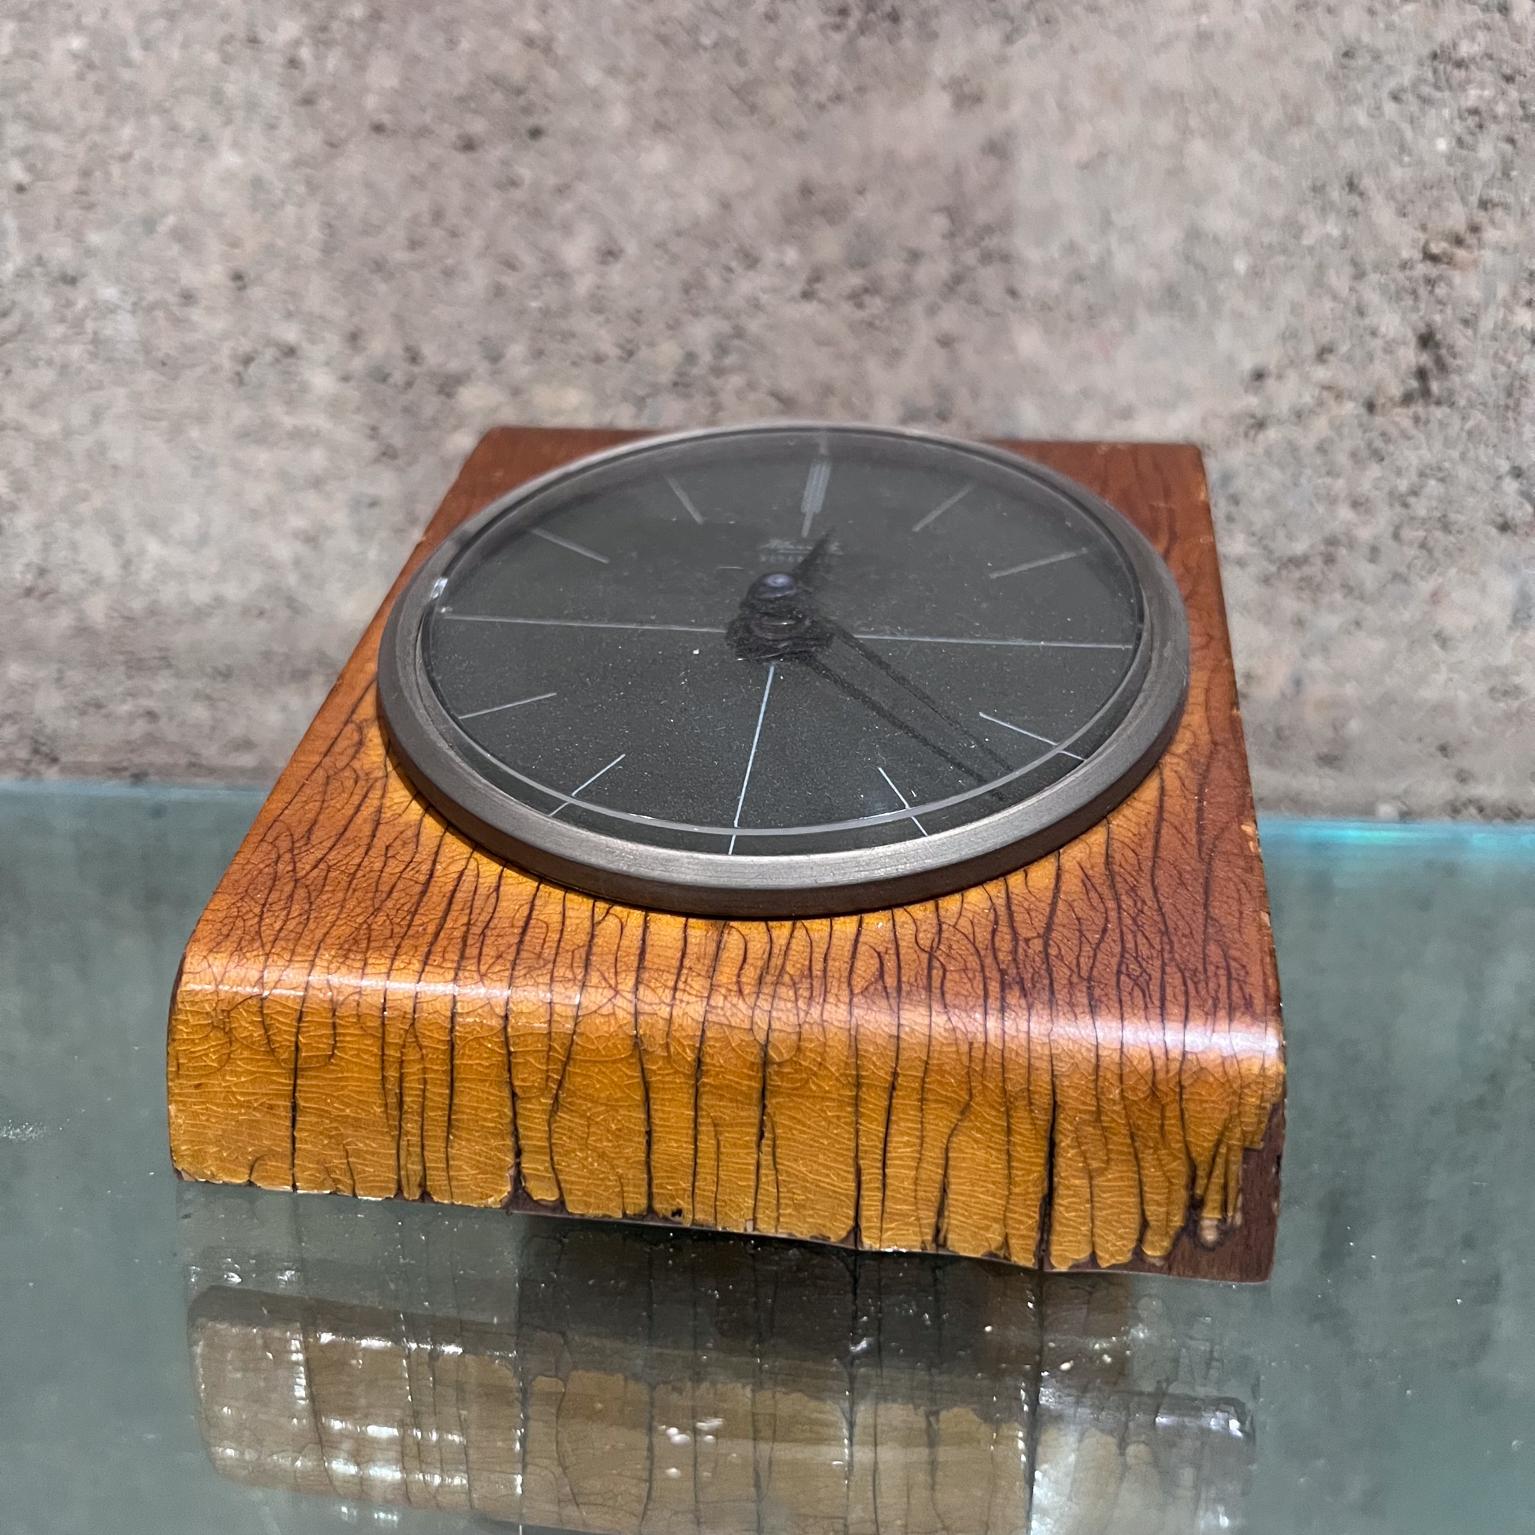 1960s Kienzle Bentwood Desk Clock Germany
brown & silver
fabulous patinated waterfall effect on bentwood case
plexiglass and metal
4.5 w x 5 d x 3
automatic clock features a new movement battery operated.
Original restored vintage condition. Expect